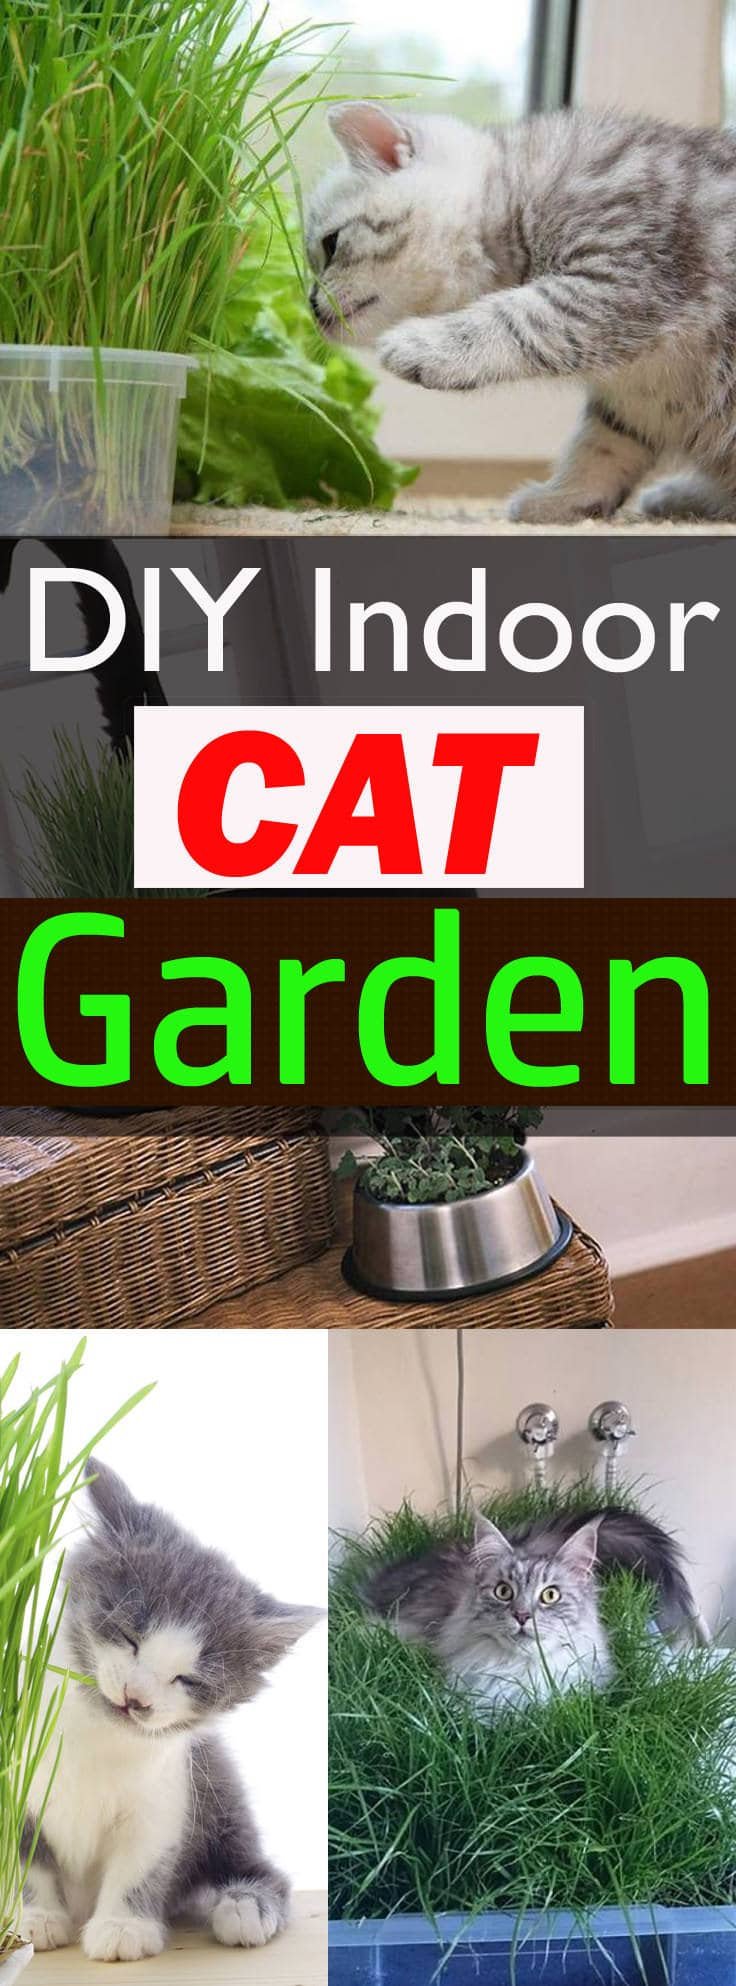 If you love your cat, it's a good idea to make an indoor cat garden for her. Just follow this step by step guide to do this!